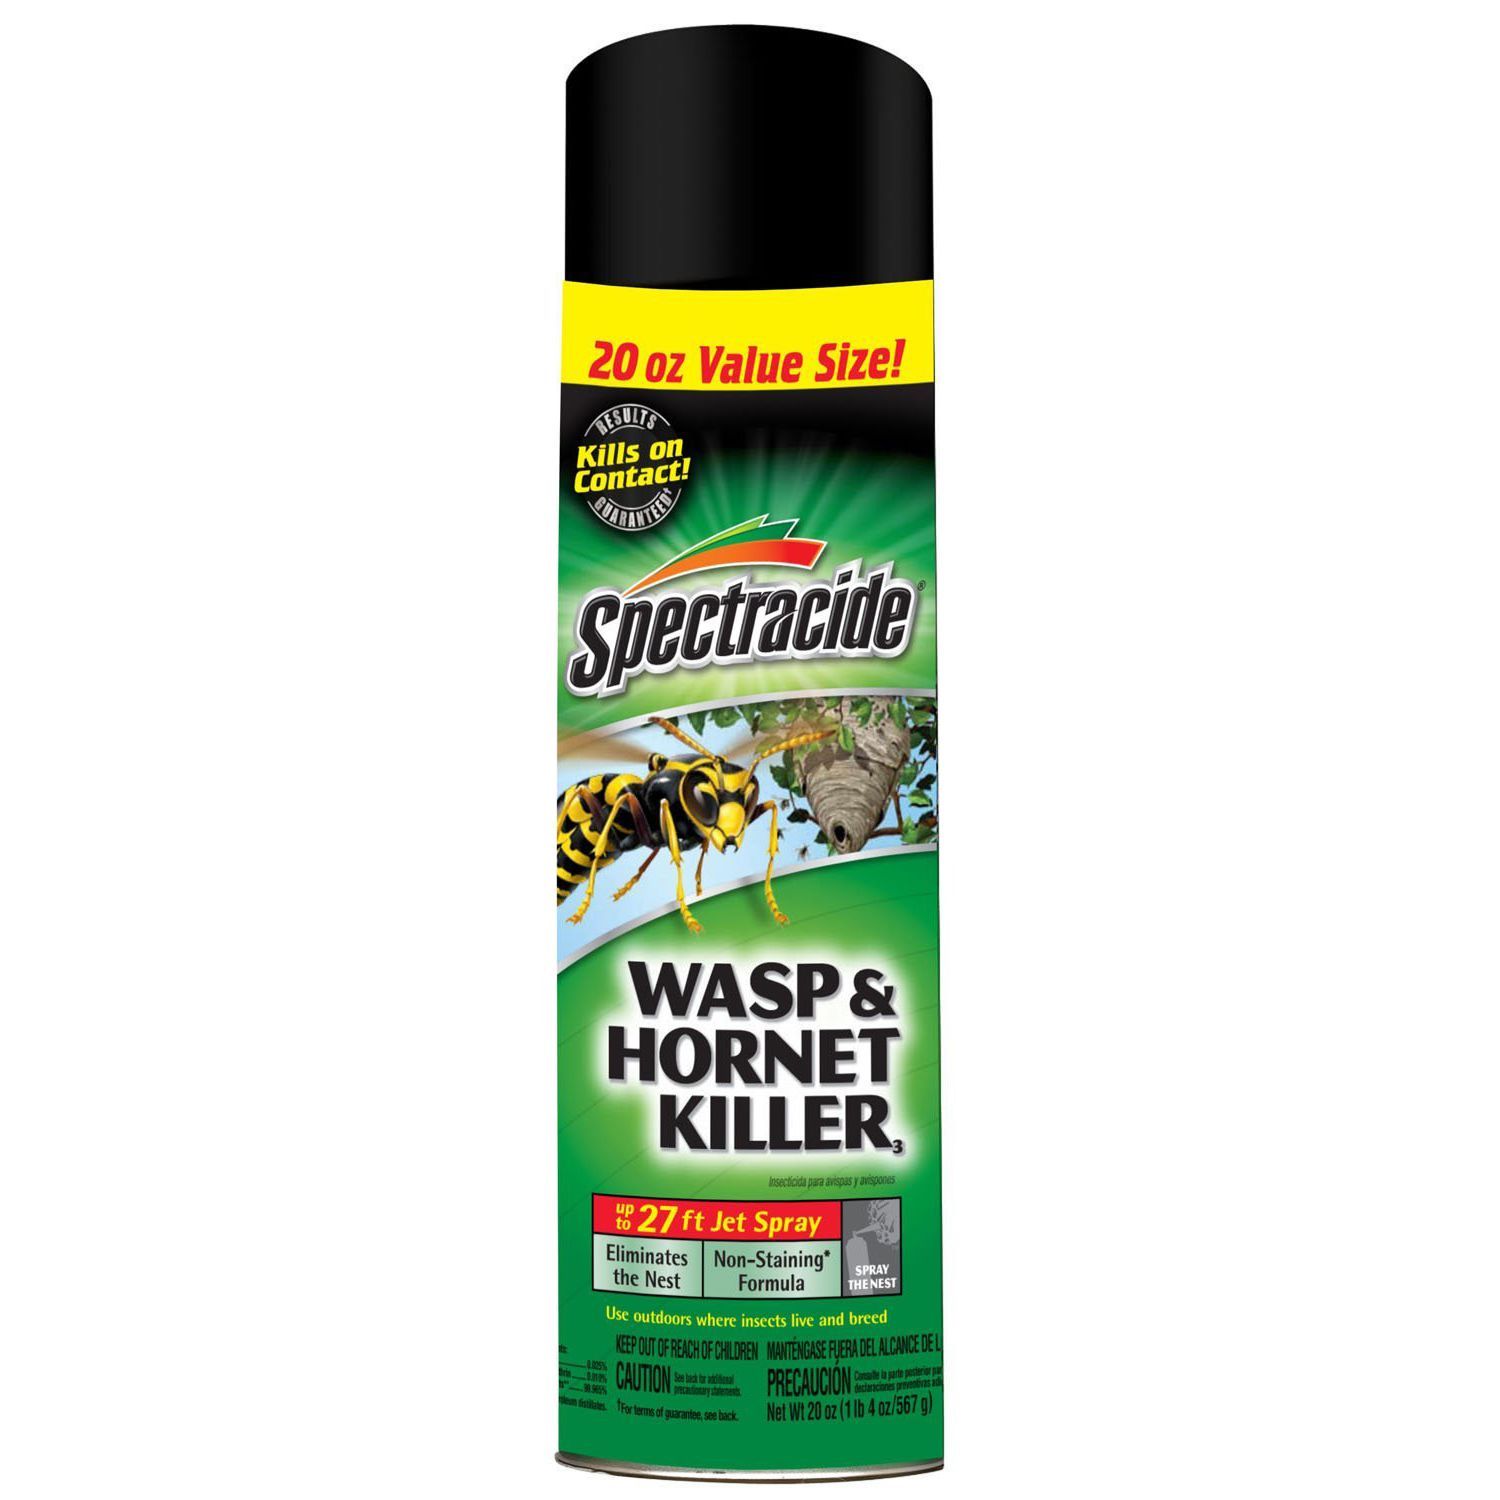 Spectracide Wasp and Hornet Killer